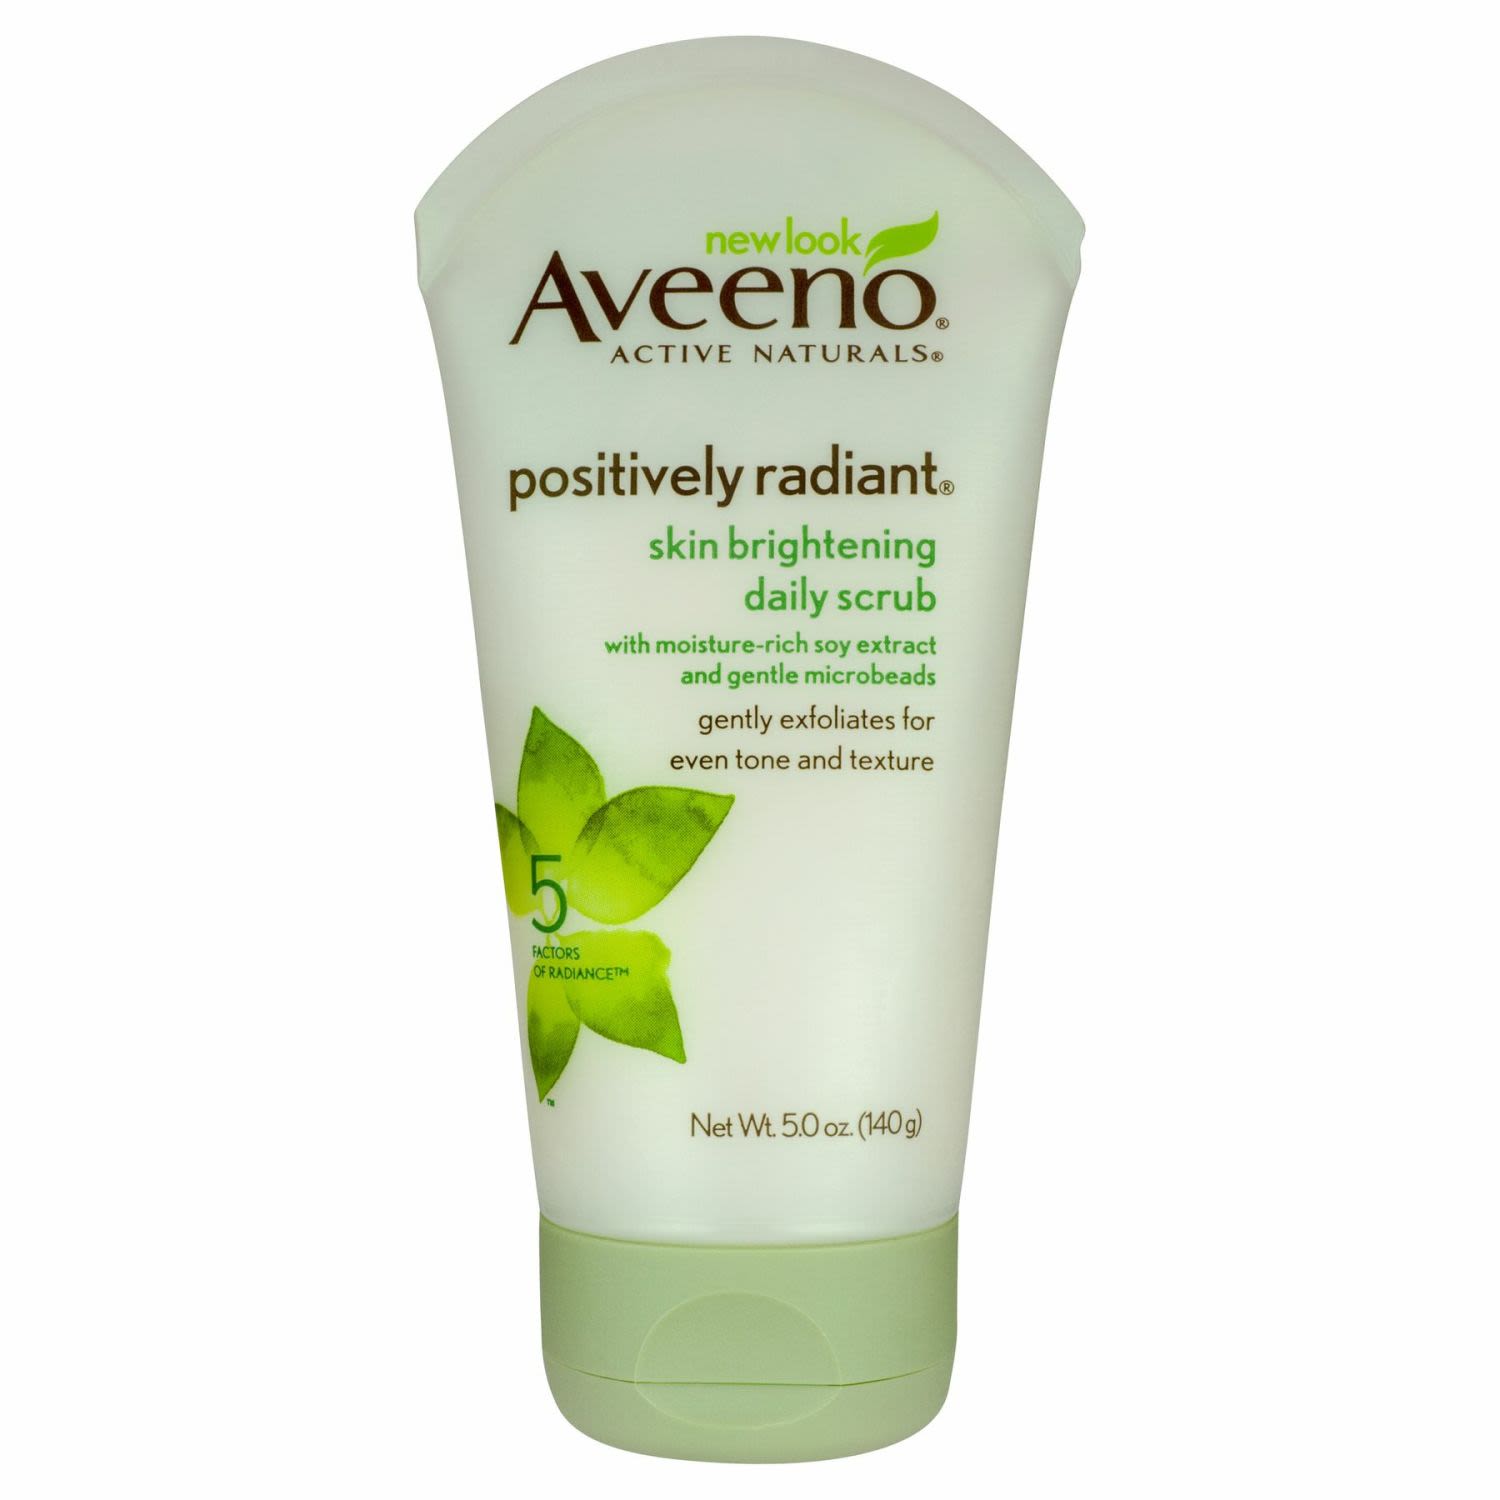 Aveeno Active Naturals Positively Radiant Daily Scrub, 141 Gram